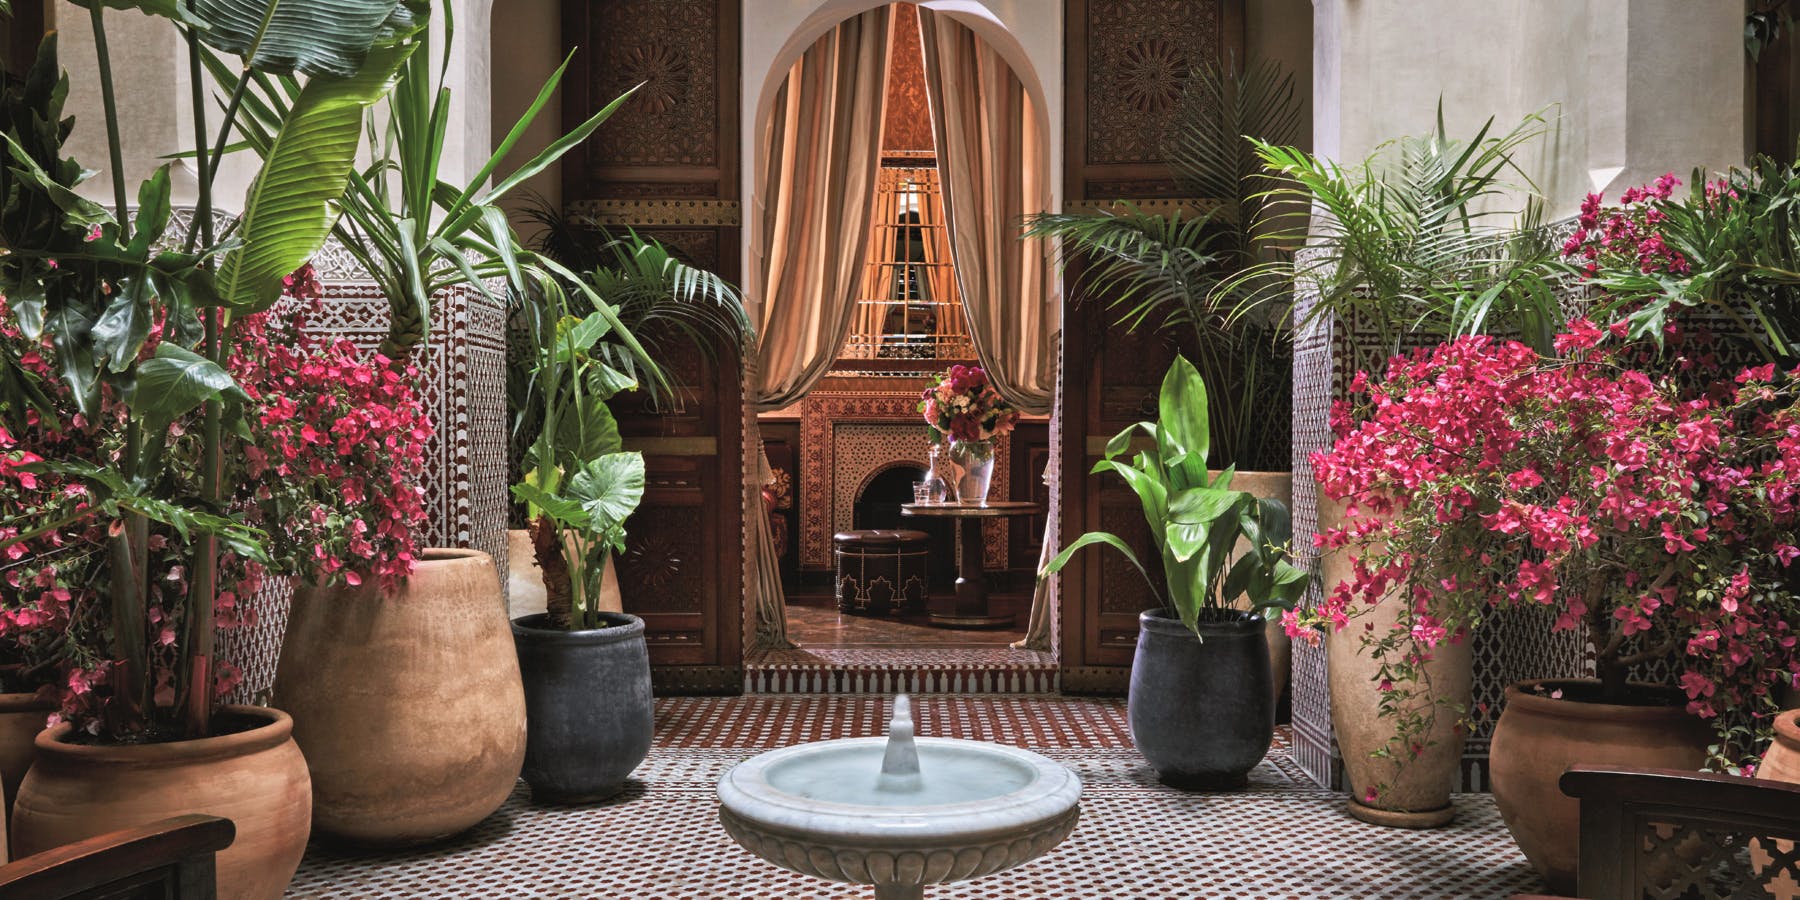 The Royal Mansour Hotel courtyard